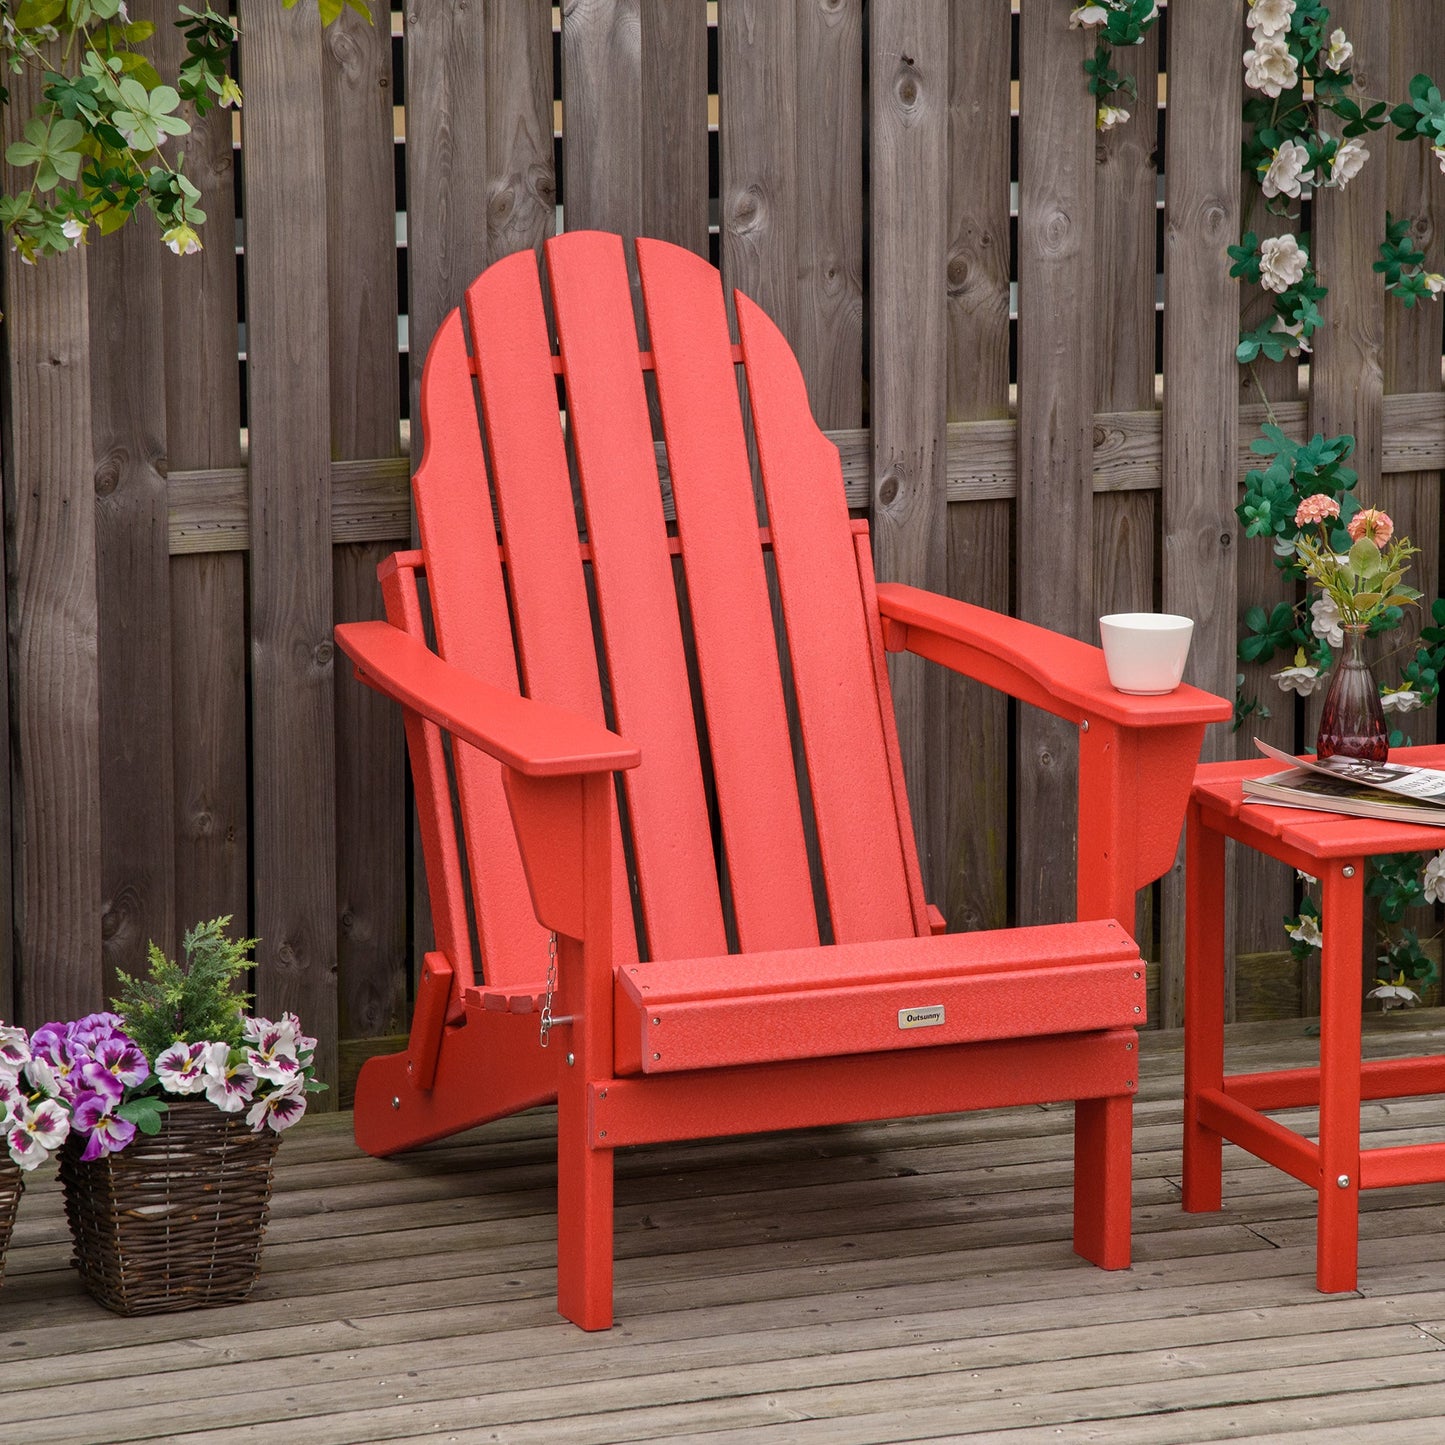 Outdoor and Garden-Folding Adirondack Chair, HDPE Outdoor All Weather Plastic Lounge Beach Chairs for Patio Deck and Lawn Furniture, Red - Outdoor Style Company